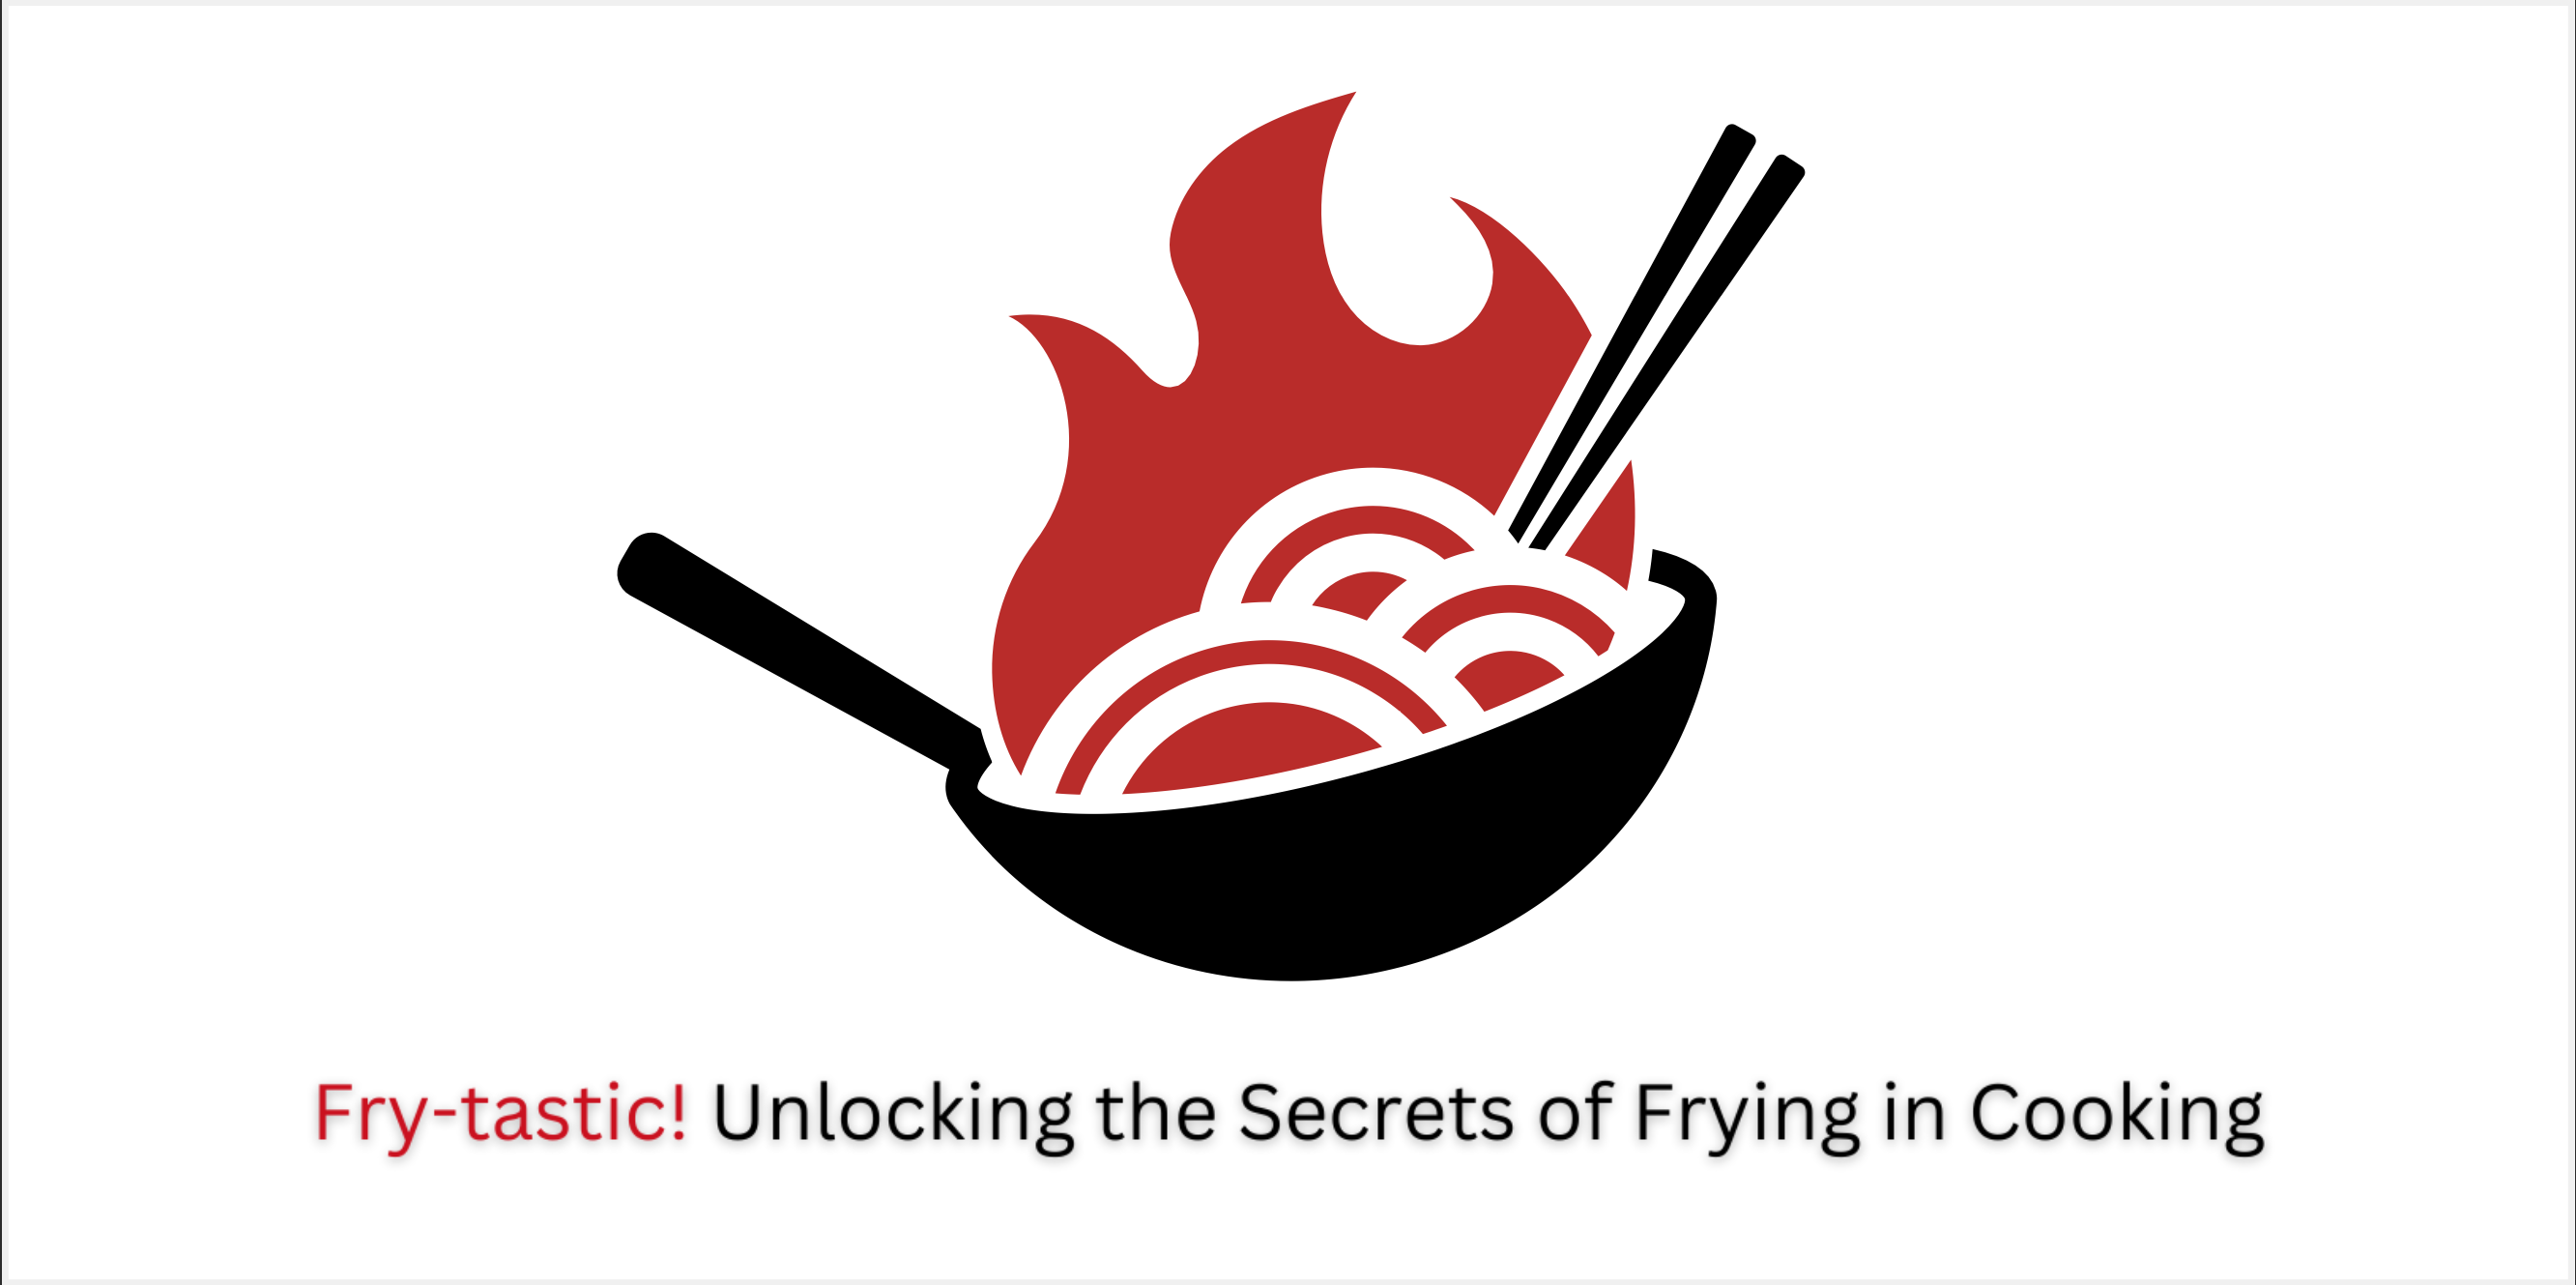 Fry-tastic! Unlocking the Secrets of Frying in Cooking